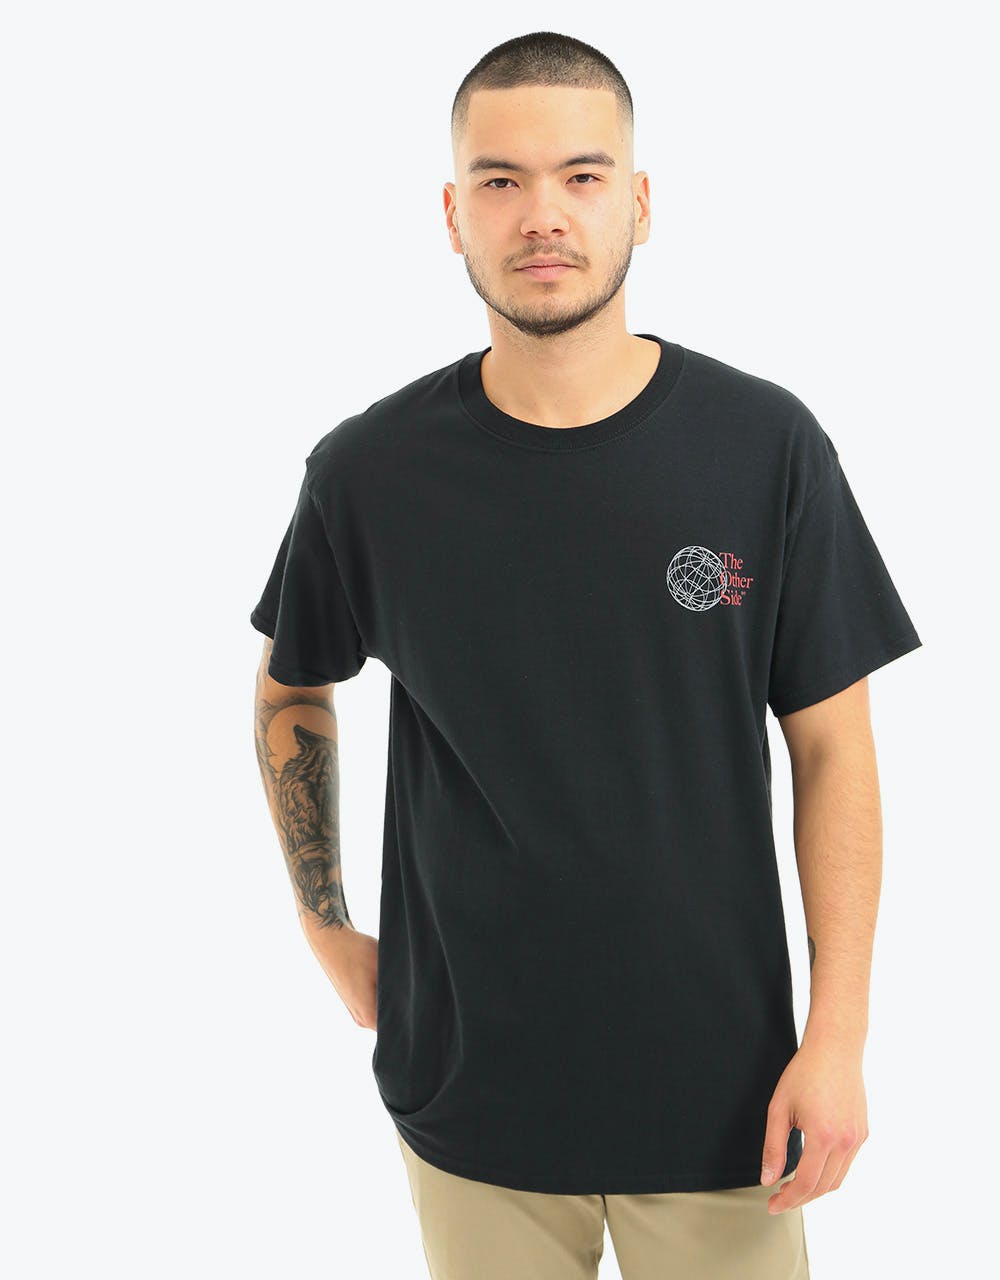 Route One The Other Side T-Shirt - Black